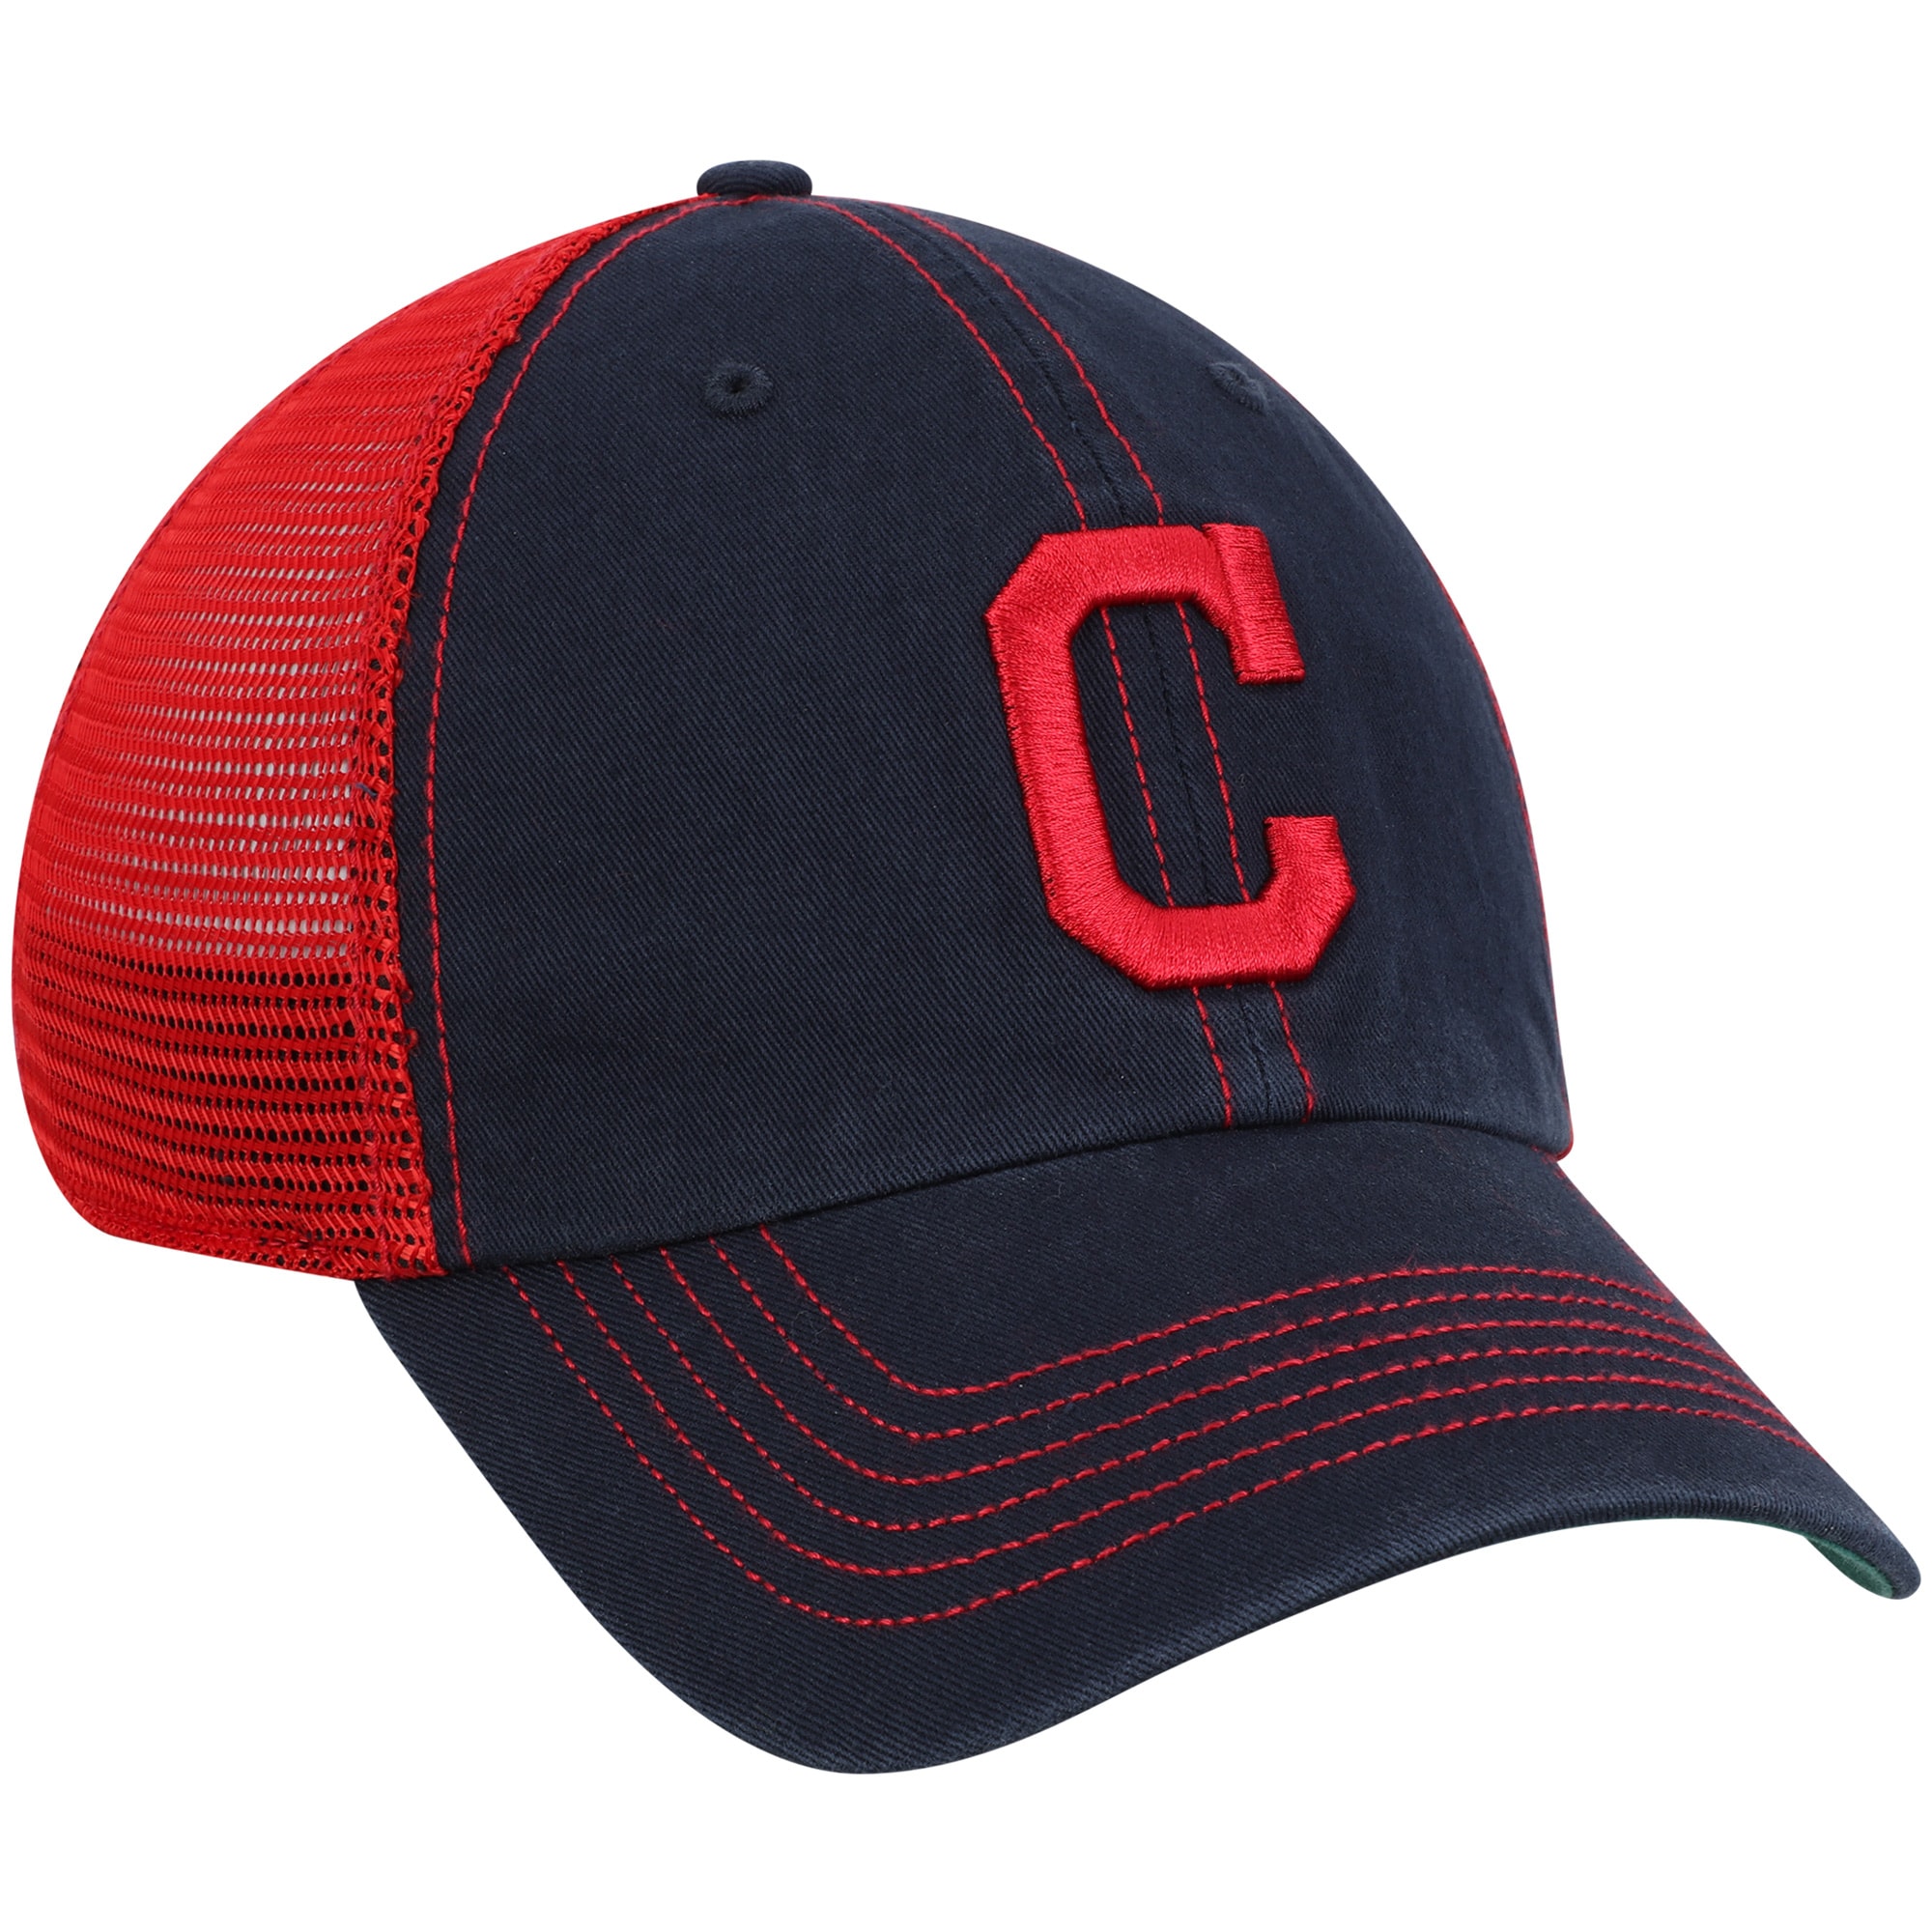 Men's '47 Navy/Red Cleveland Indians Trawler Clean Up Trucker Hat - OSFA - image 3 of 4